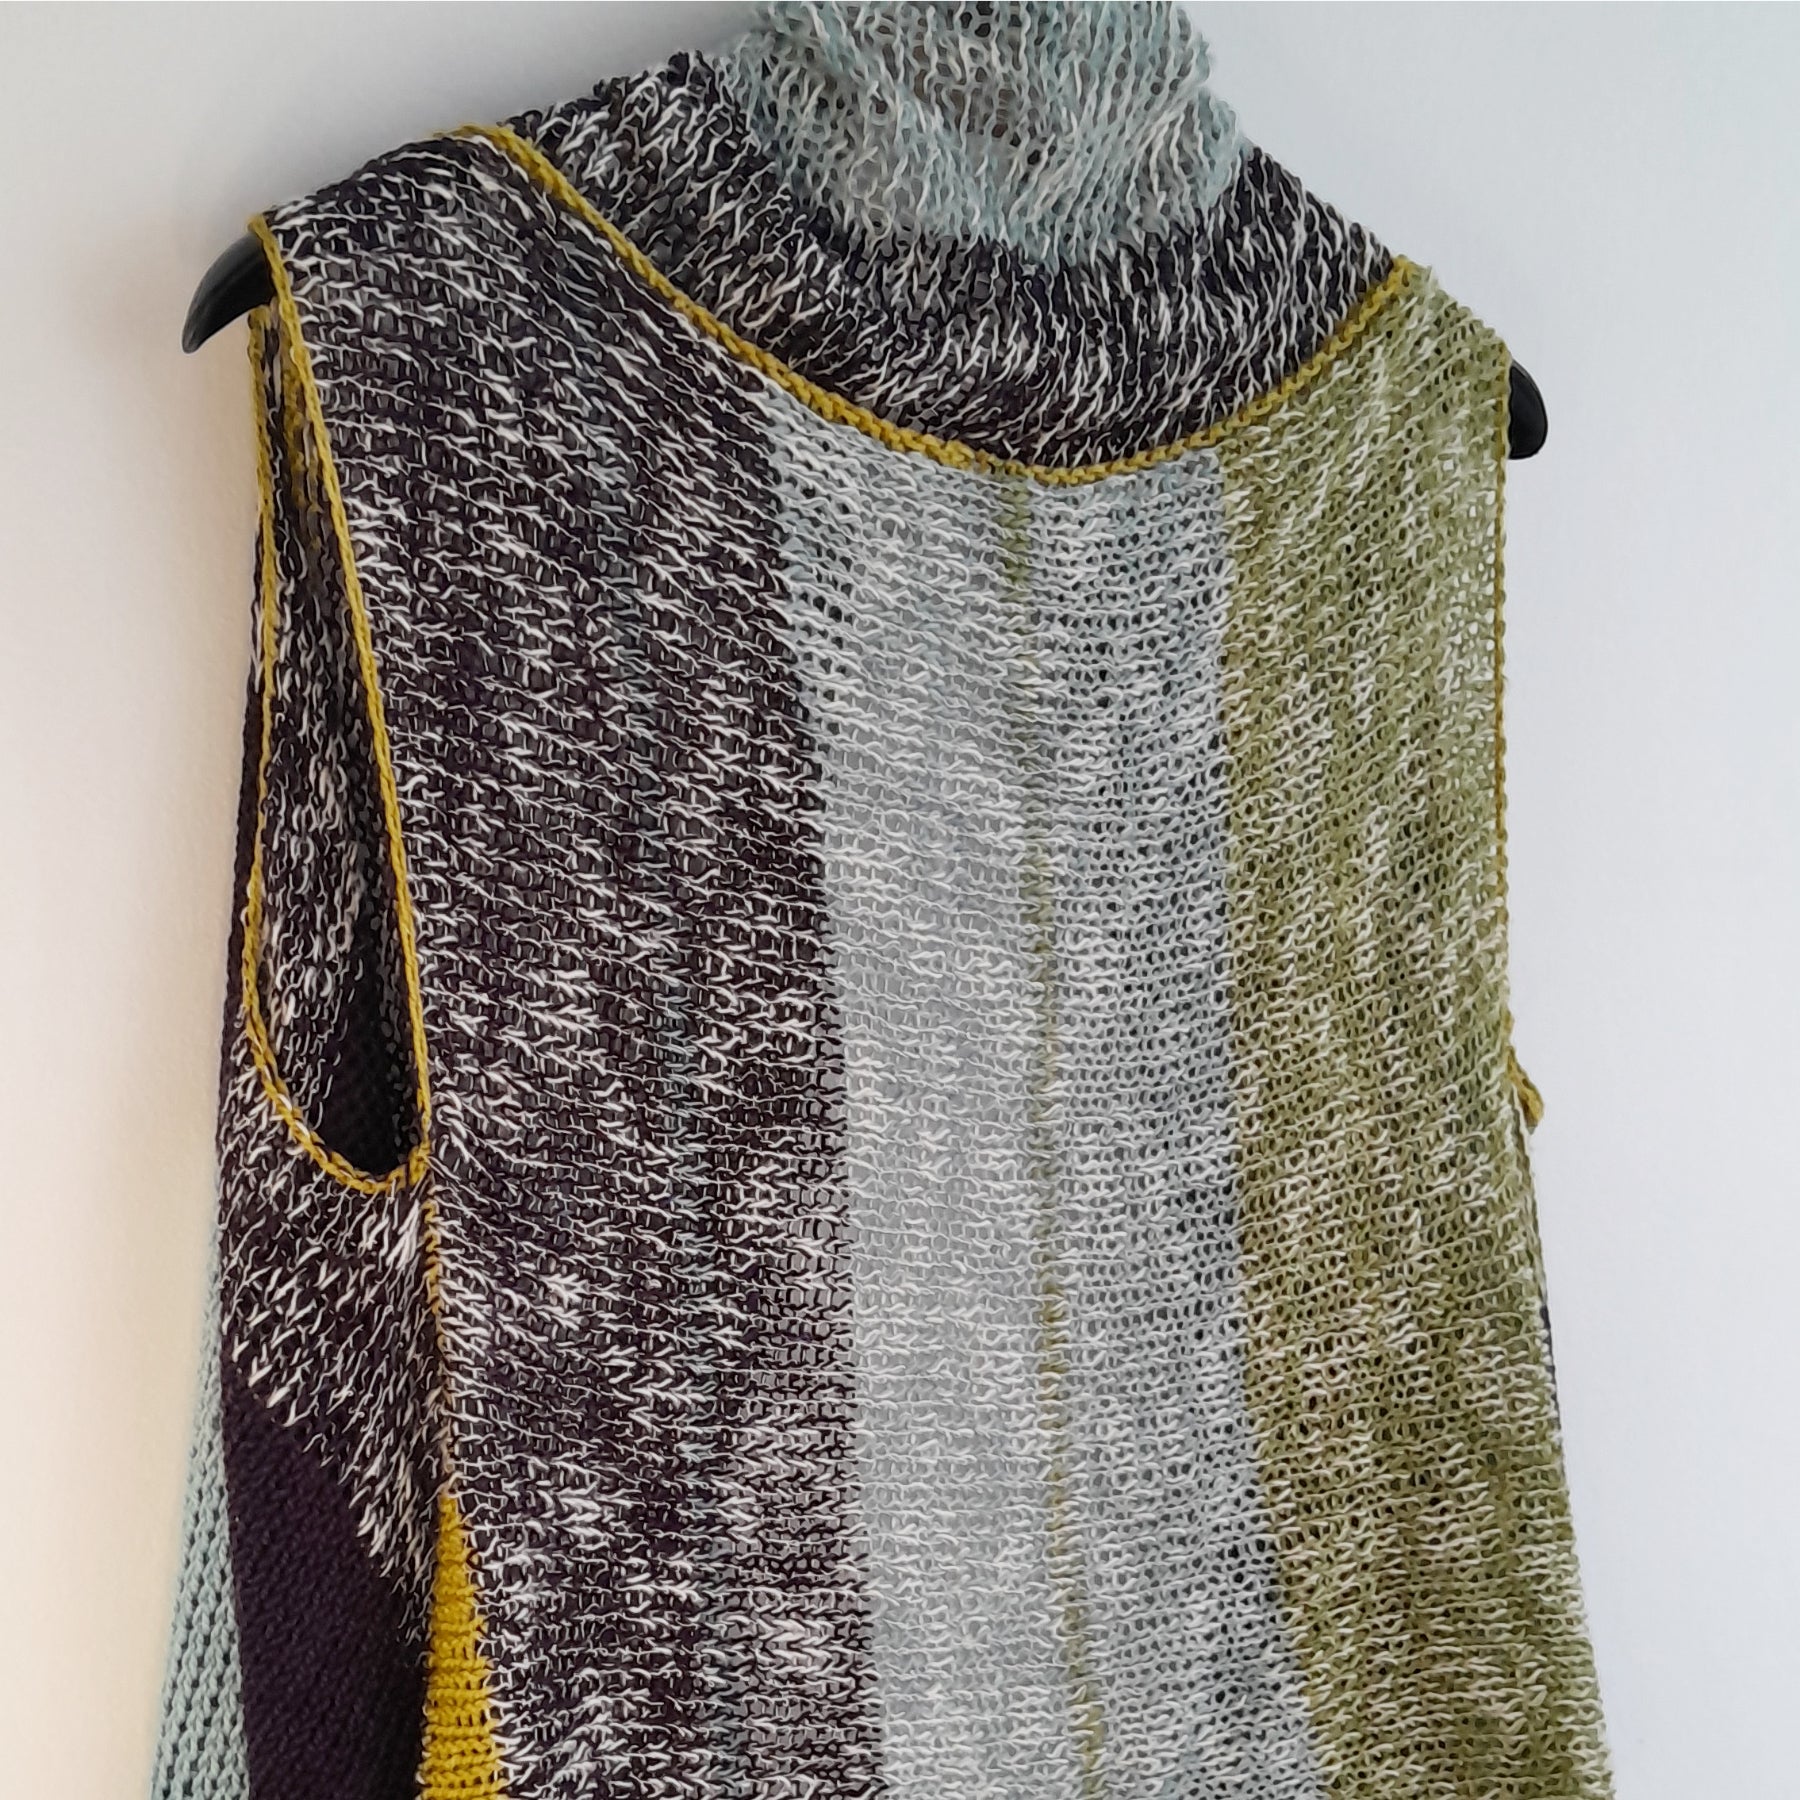 Convertible Gilet - Greens & Blues, Aubergine, Chartreuse